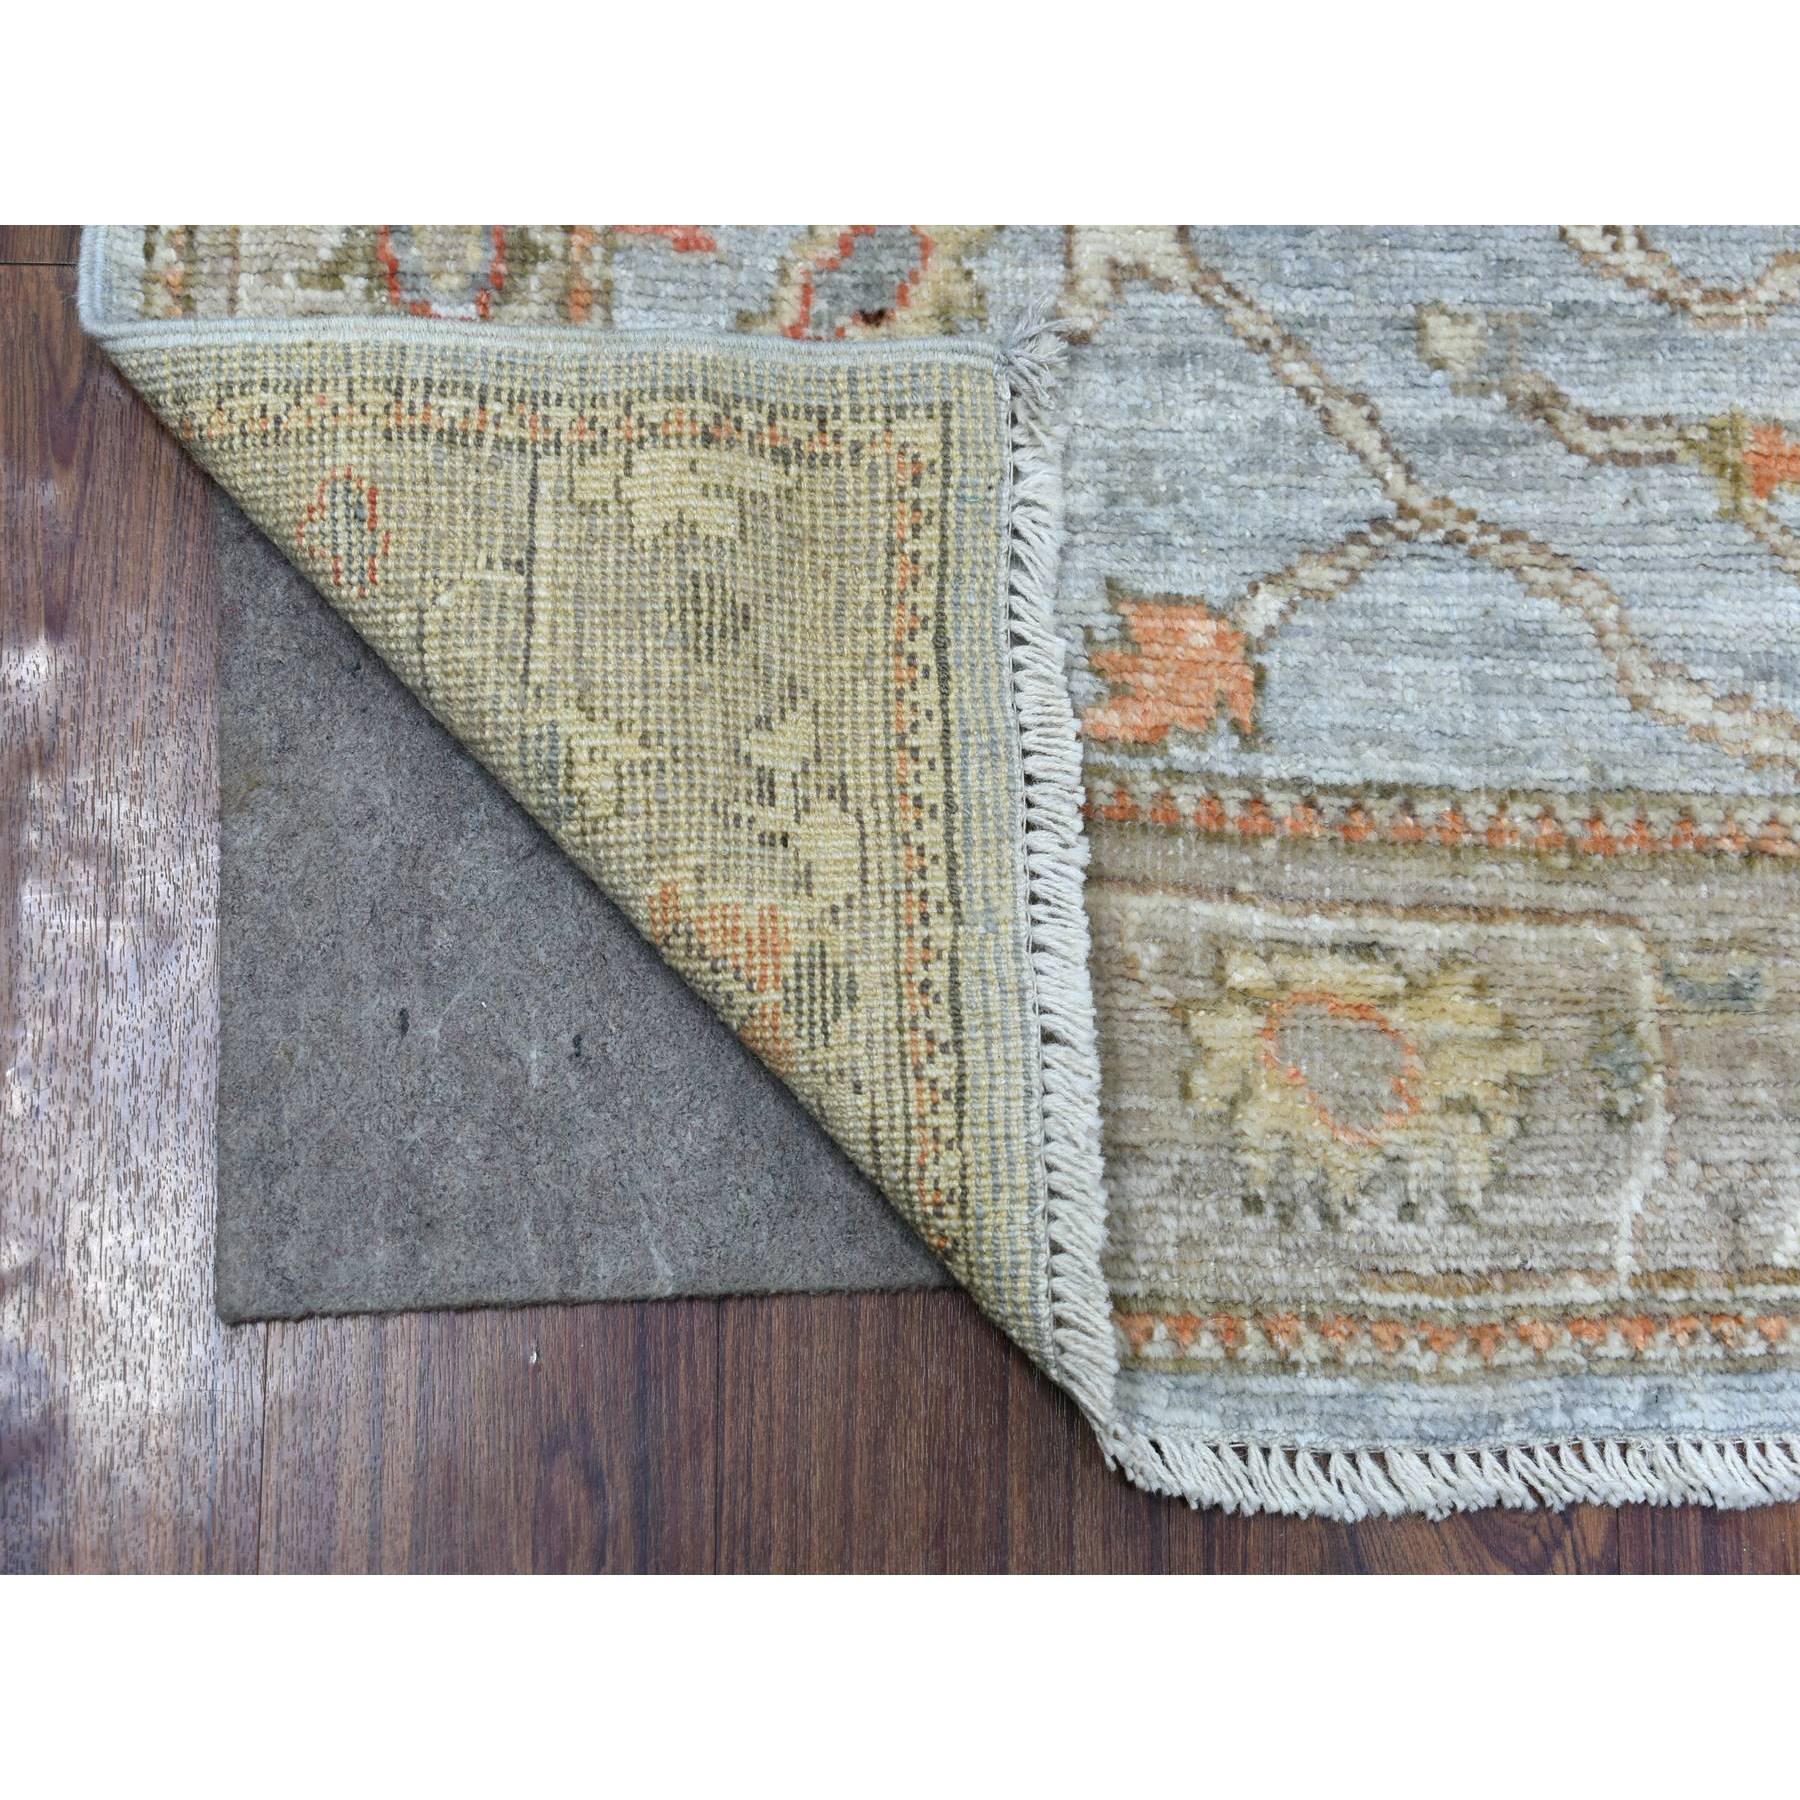 2'8"x11'7" Gray Angora Oushak with All Over Leaf Design Afghan Wool Hand Woven Oriental Runner Rug 